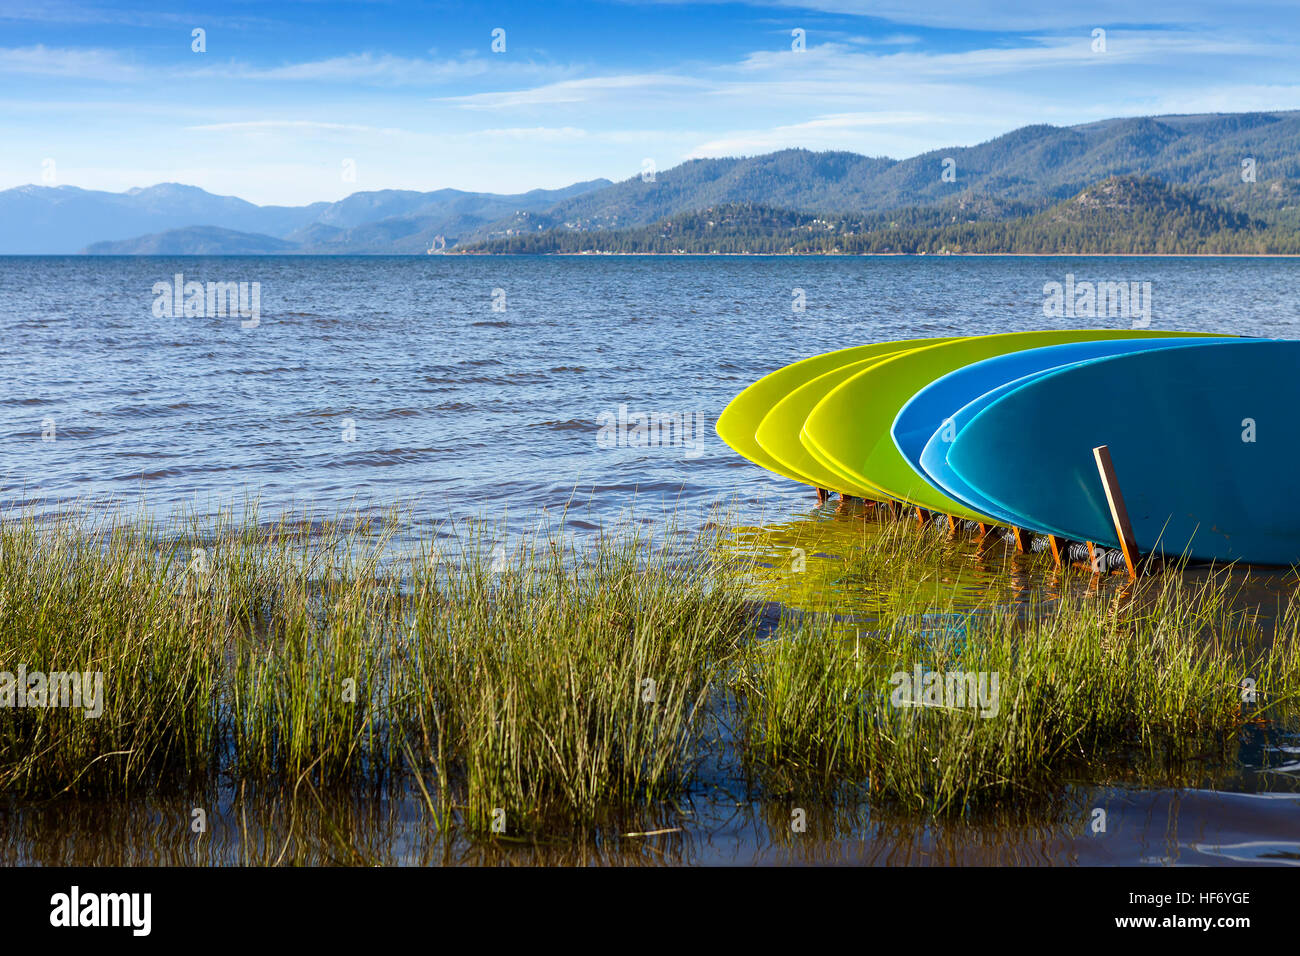 Vermietung Stand Up Paddle Boards am Ufer des Lake Tahoe, California. Stockfoto